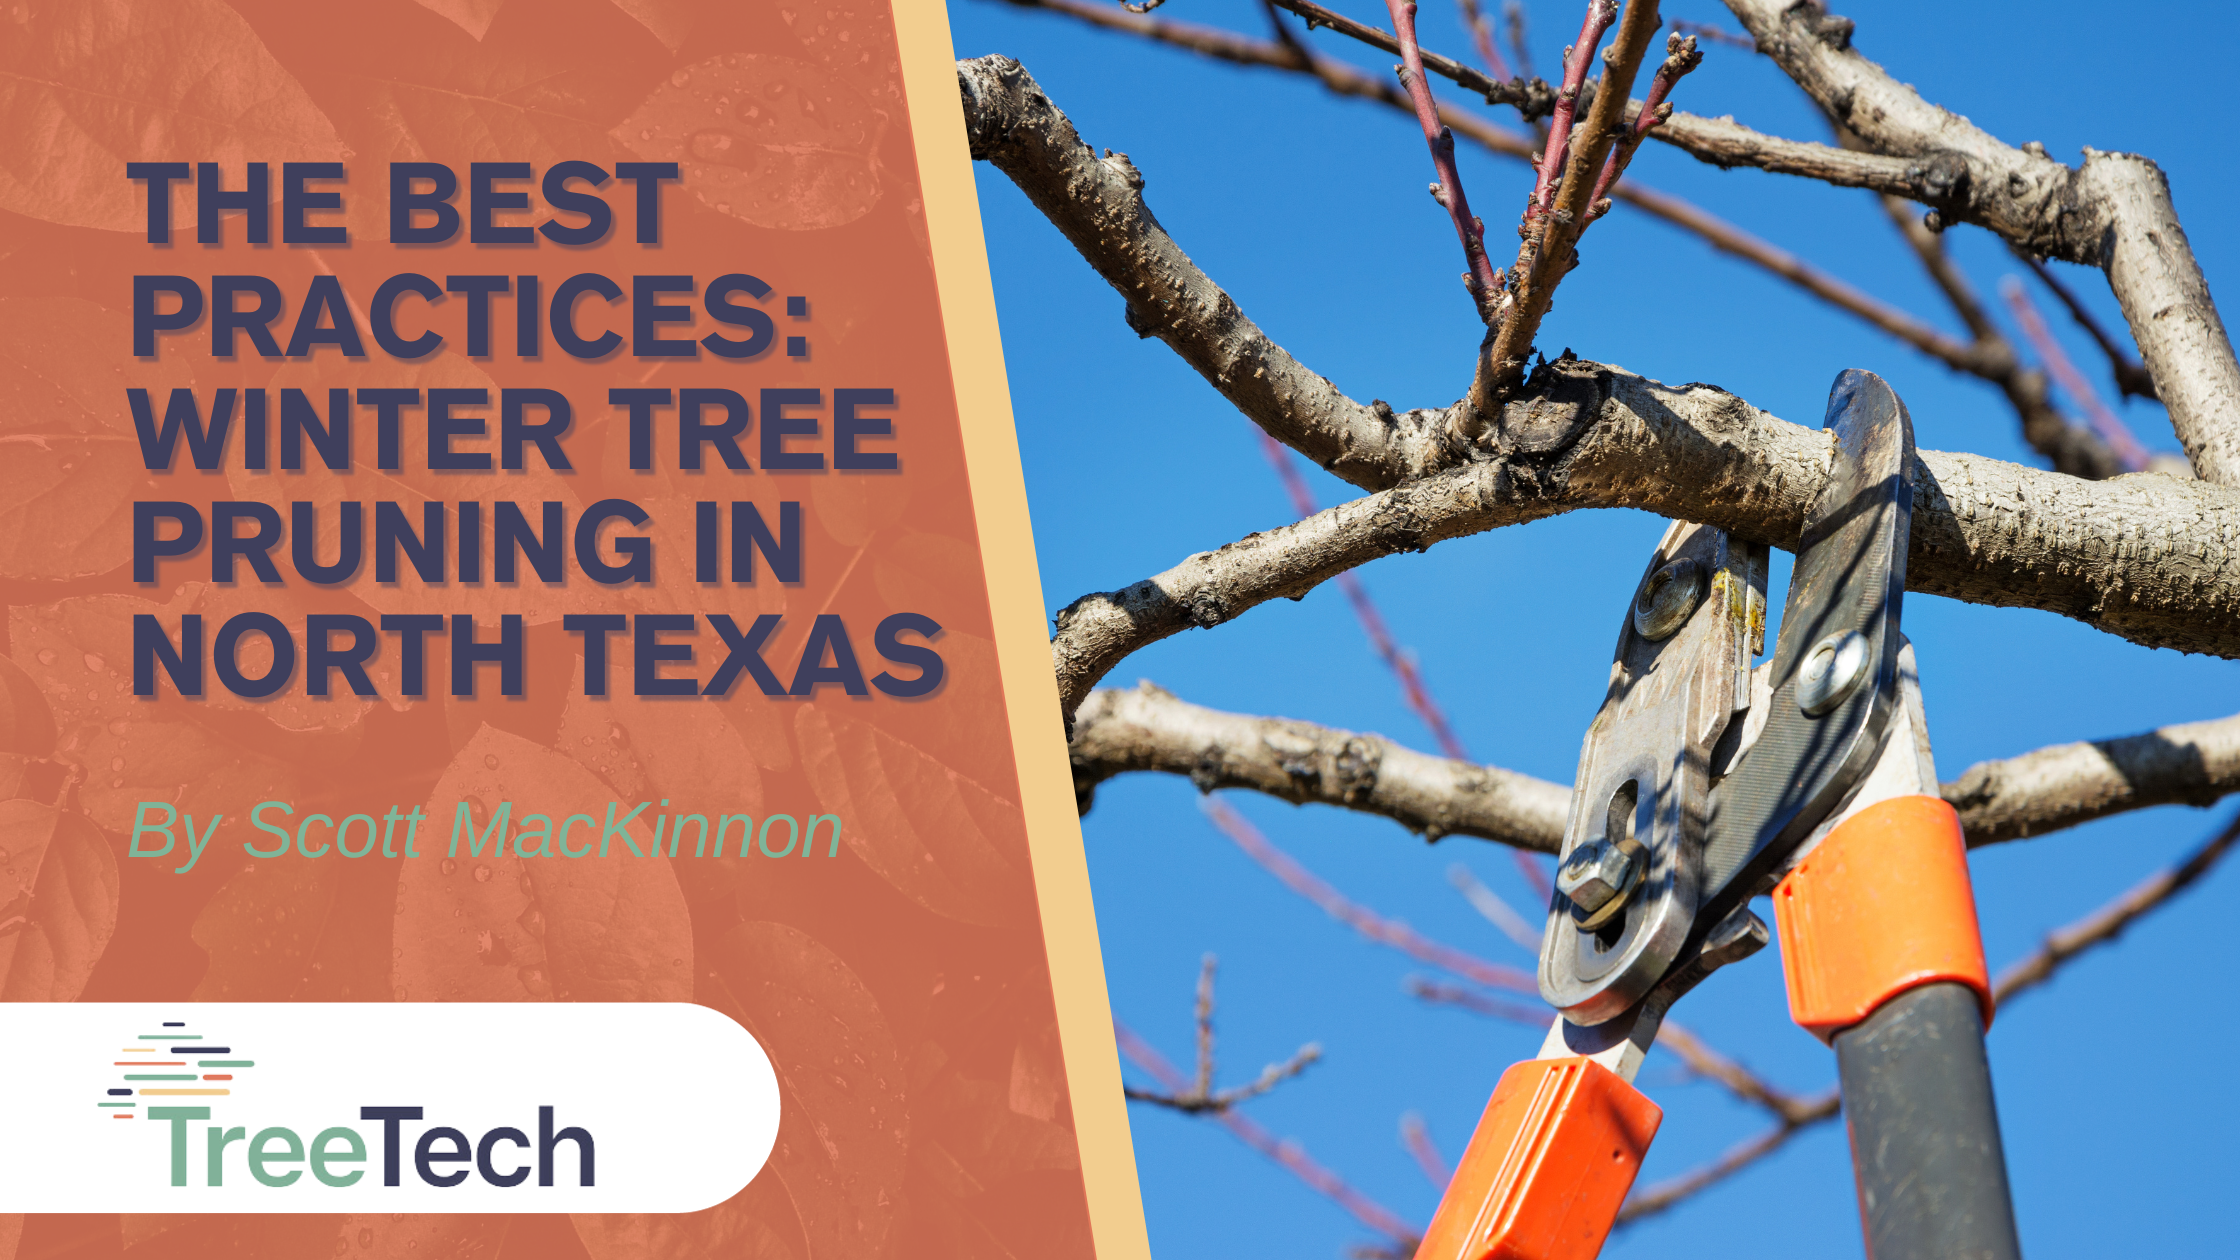 The Best practice for winter tree pruning for north texas